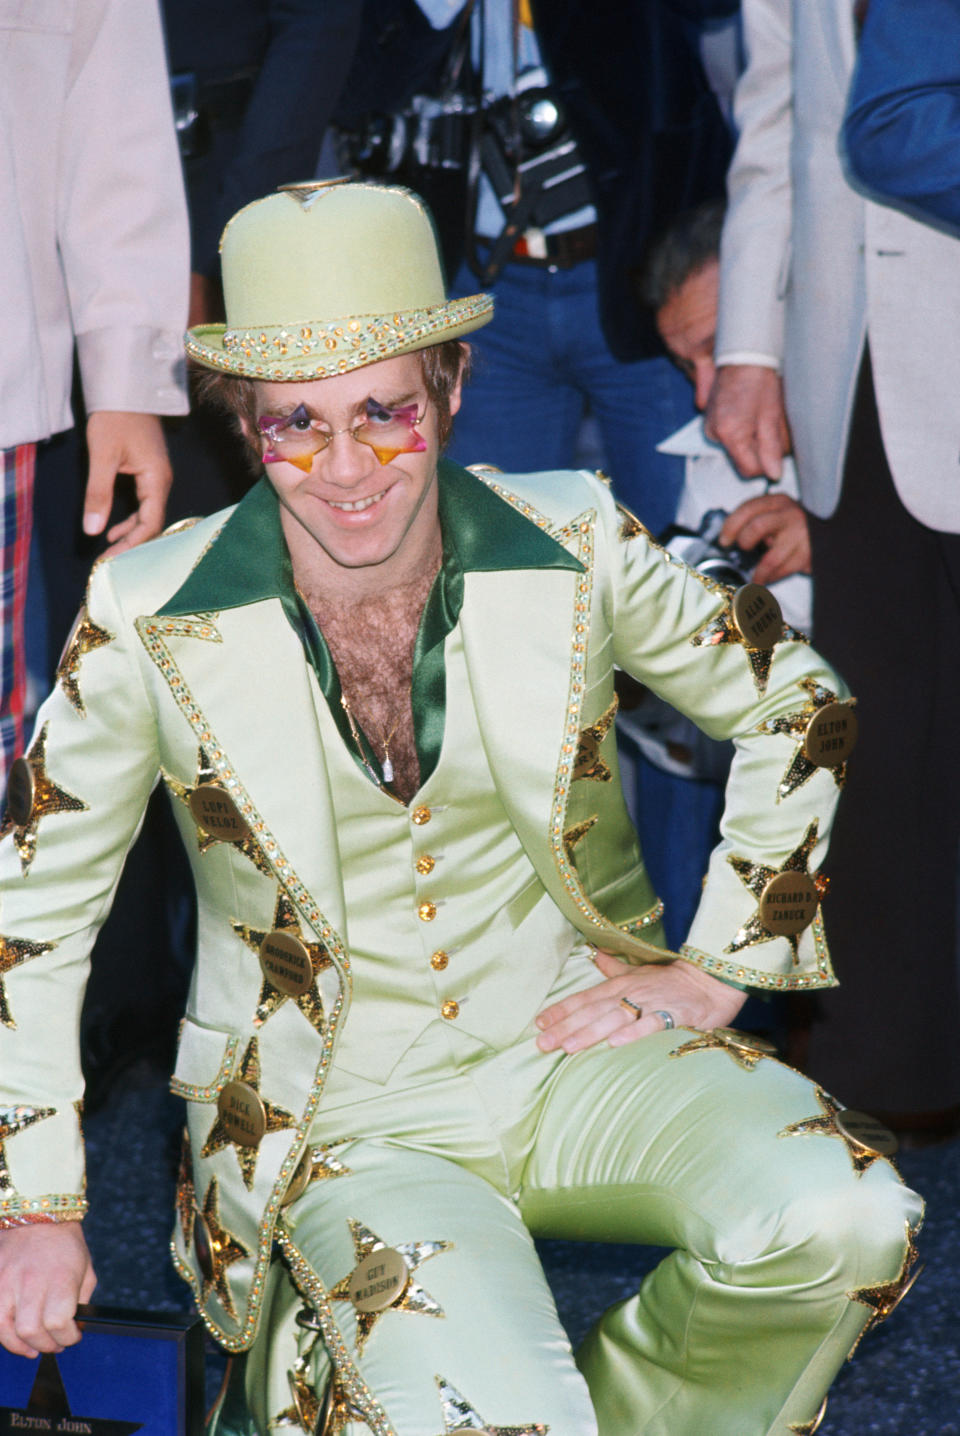 John is honored with a star on the Hollywood Walk of Fame in Los Angeles in October 1975. He wears a suit emblazoned with named stars, including his own.